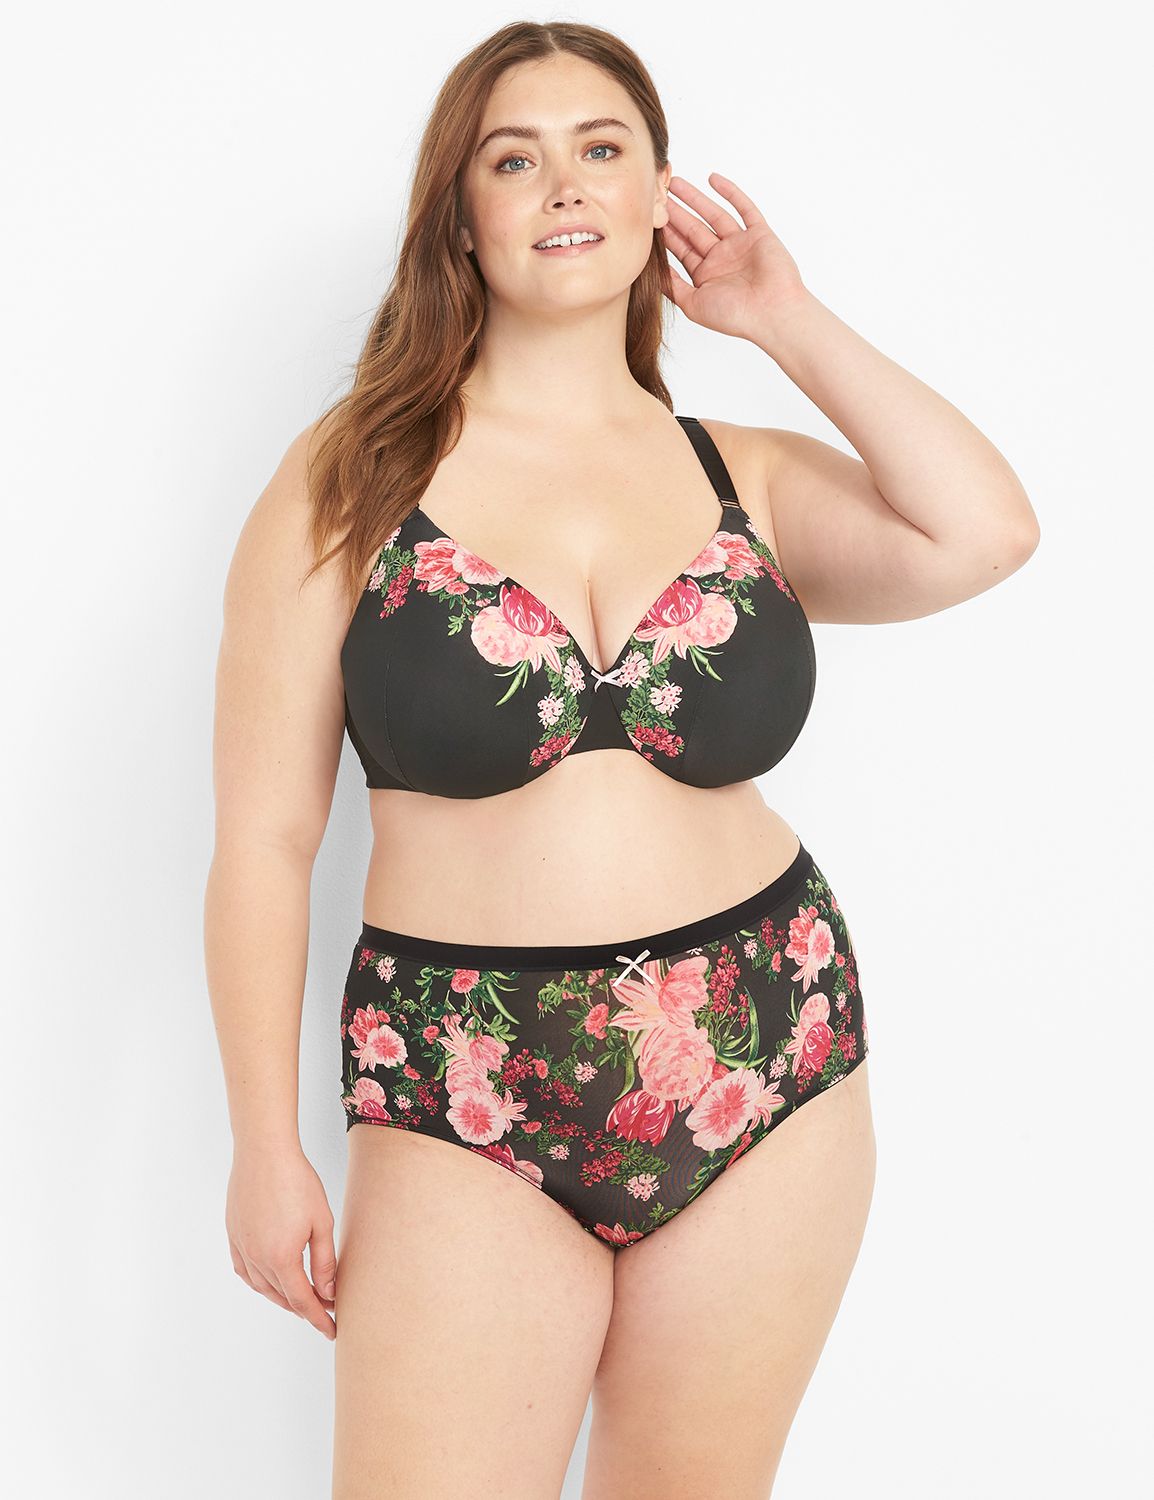 Cacique 40F Bra Full Coverage Maroon Floral Print Underwire Plus Size  Stretch 70 - $23 - From Bailey